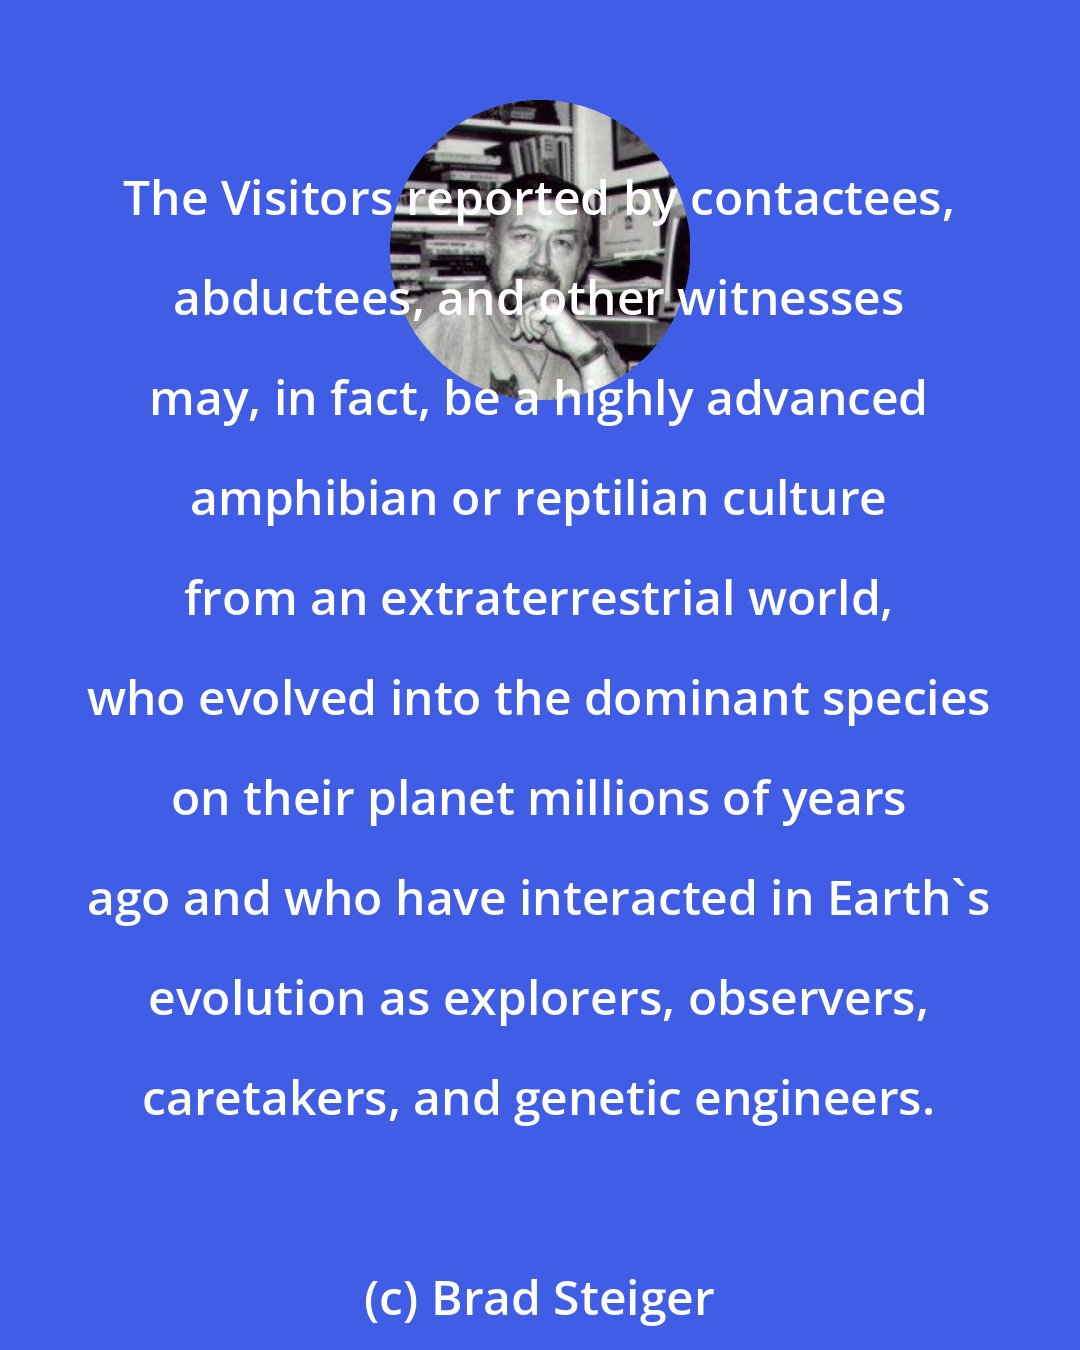 Brad Steiger: The Visitors reported by contactees, abductees, and other witnesses may, in fact, be a highly advanced amphibian or reptilian culture from an extraterrestrial world, who evolved into the dominant species on their planet millions of years ago and who have interacted in Earth's evolution as explorers, observers, caretakers, and genetic engineers.